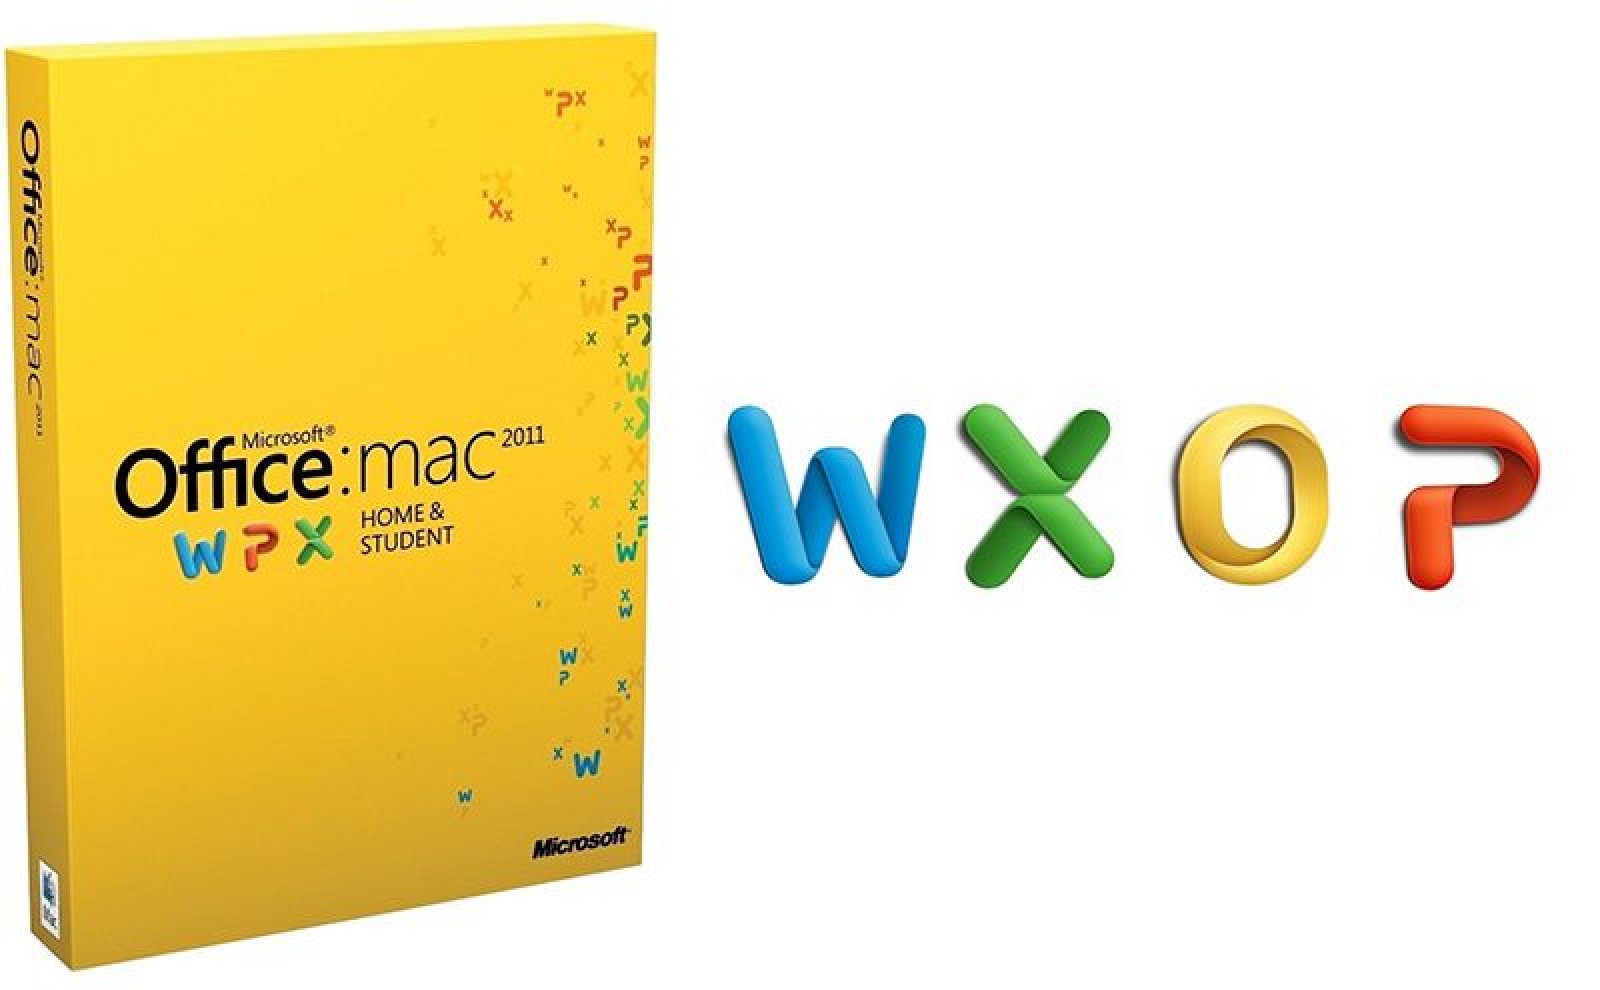 Microsoft Office For Mac Free Download 2011 Full Version